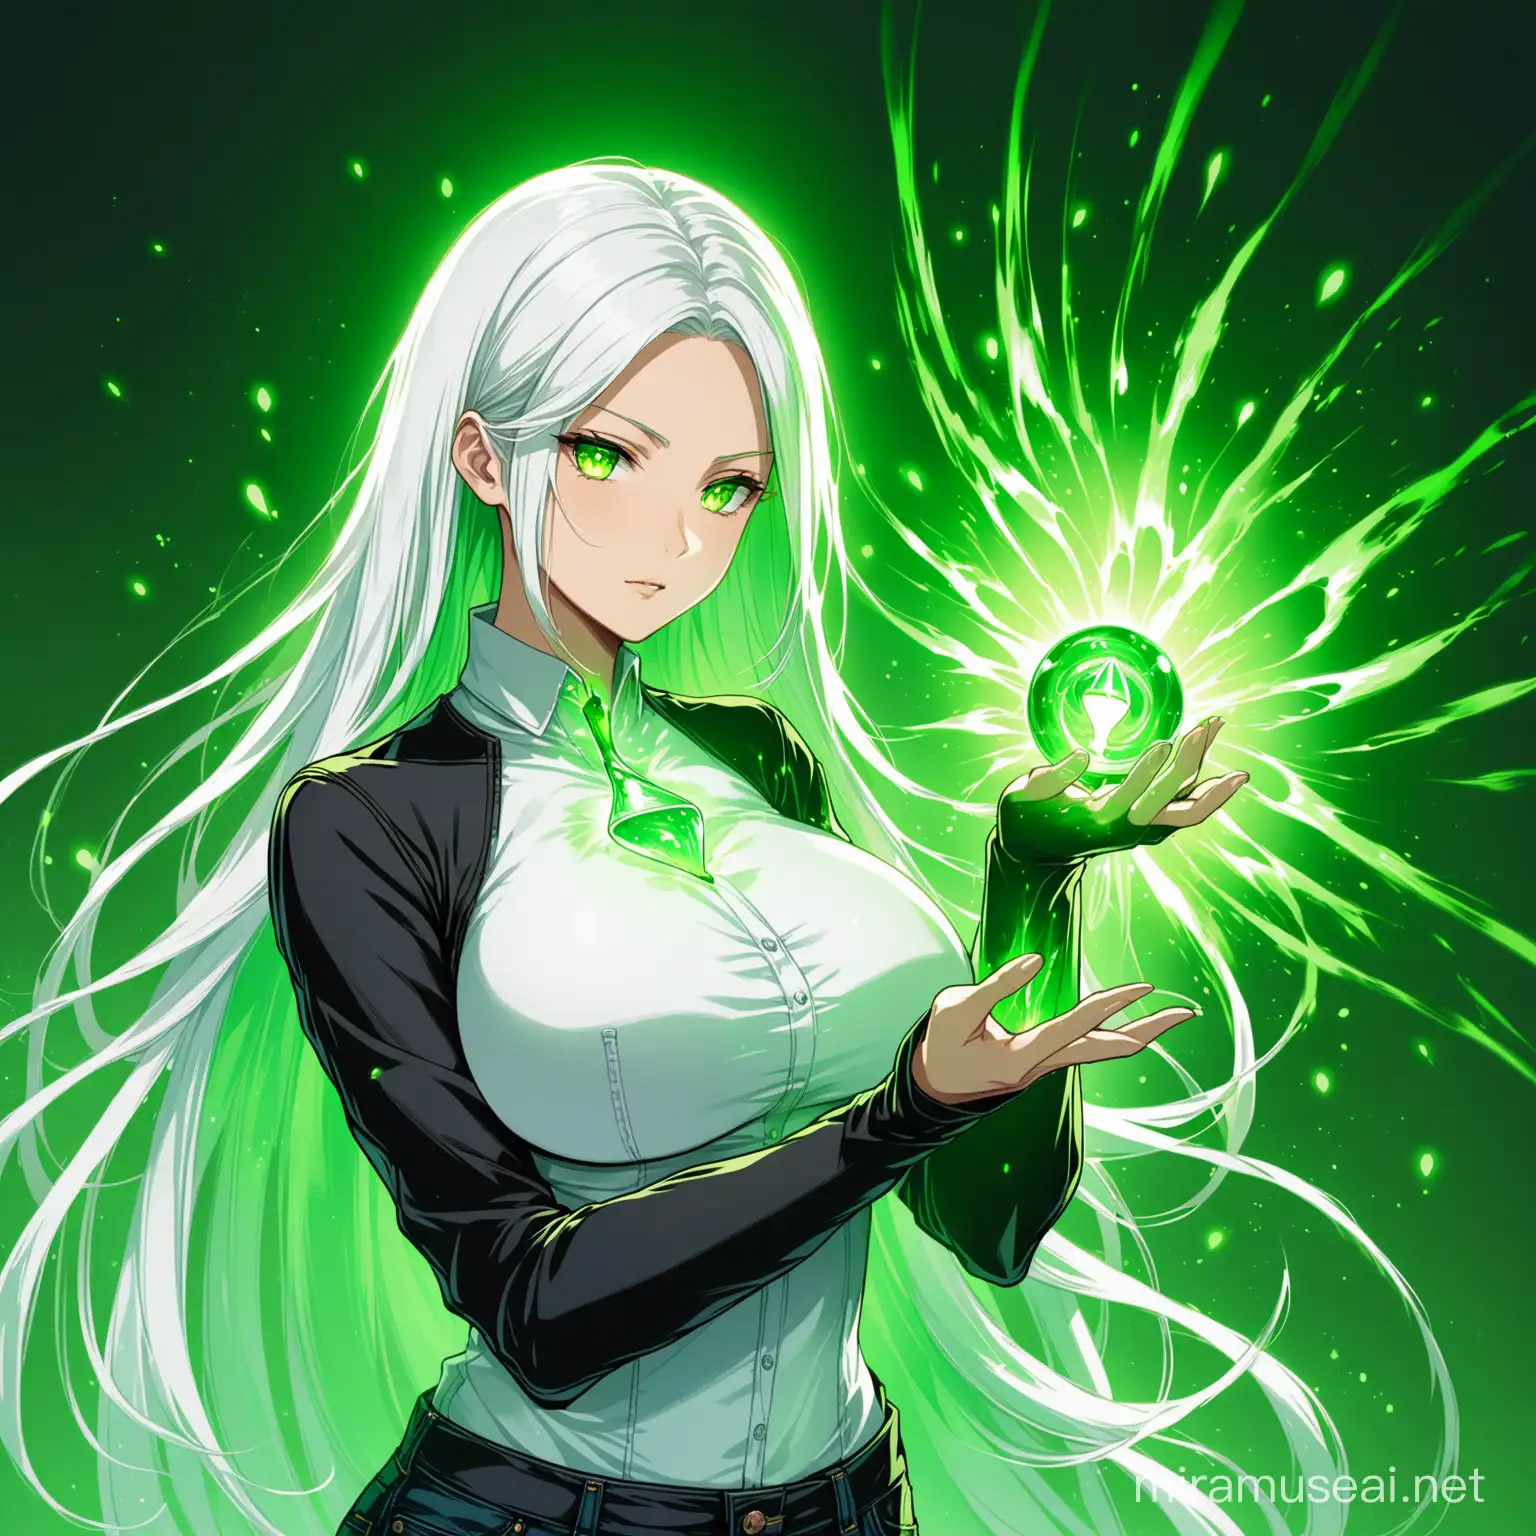 A female character. Her "one hand is completely hardened in black" and "another one is normal". It have green aura coming out of it. She have very big boobs. Her body figure is Hourglass. She is wearing a white shirt, with sleeve folded. With her left hand she is concentrating some green and black energy over her palm. She have long white hair with little bare light green highlights on the hair. She is wearing a jeans. Properly illustrated